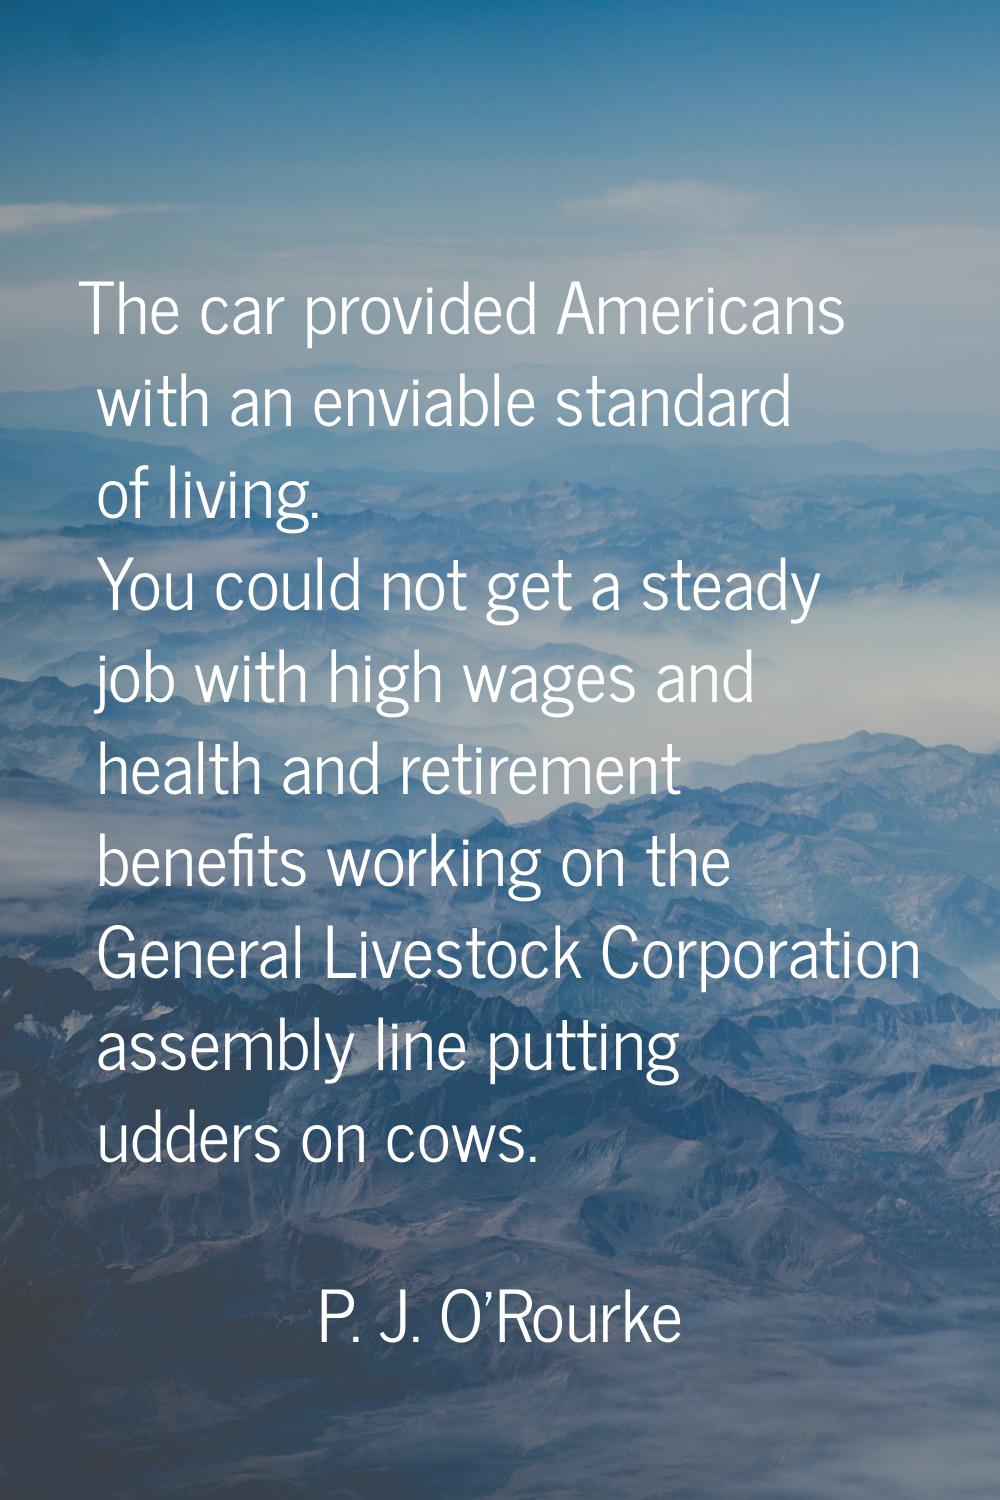 The car provided Americans with an enviable standard of living. You could not get a steady job with